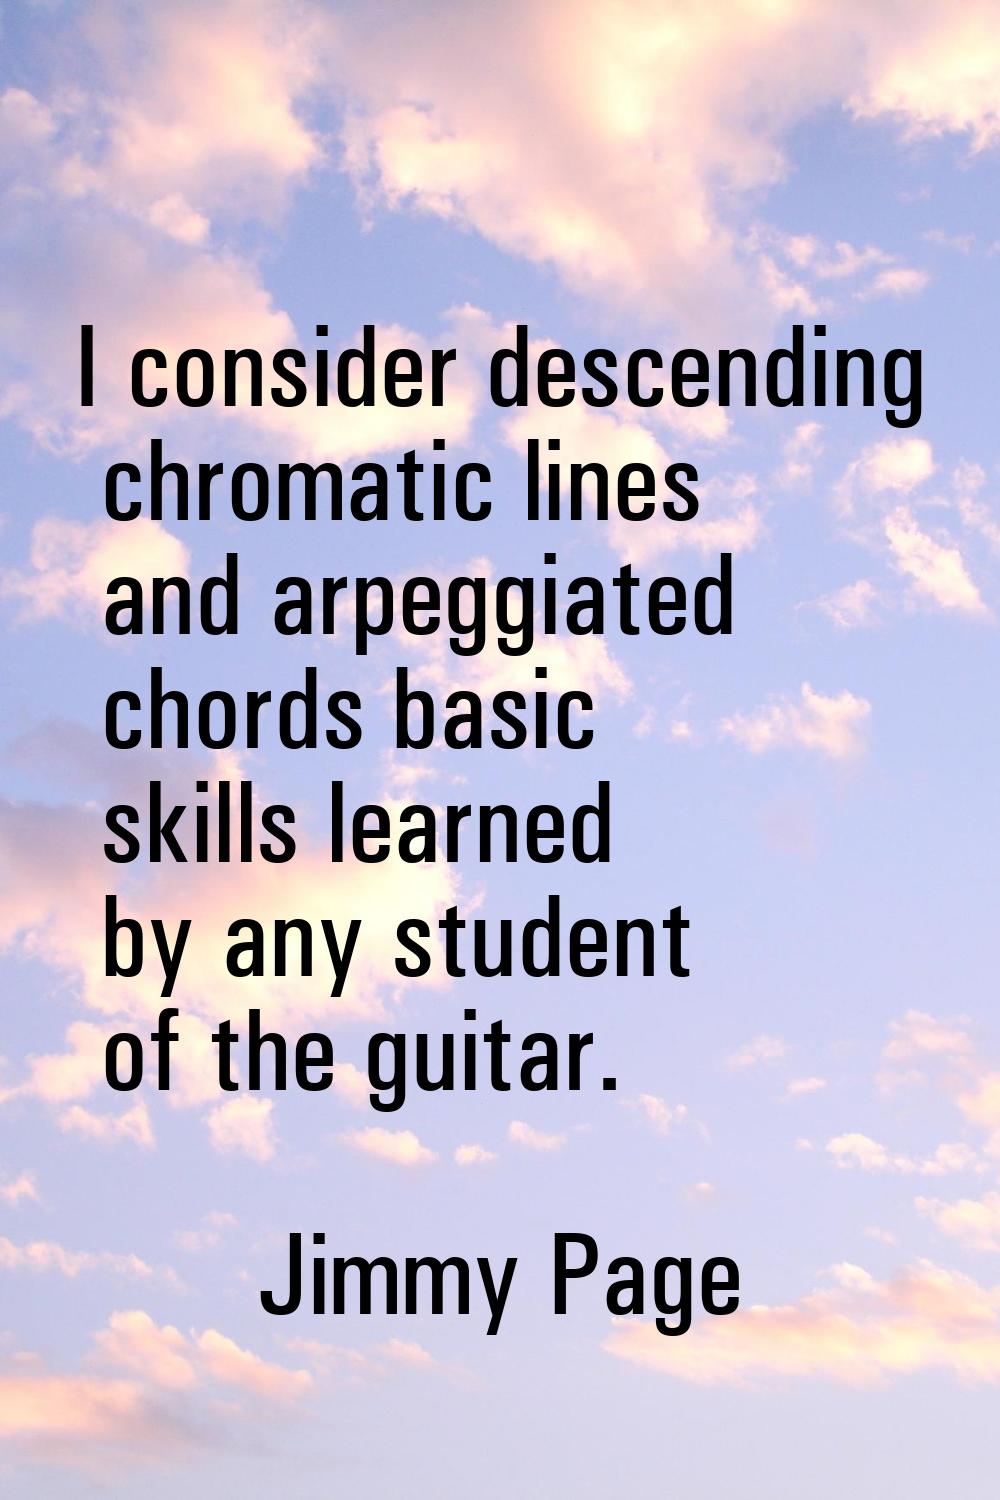 I consider descending chromatic lines and arpeggiated chords basic skills learned by any student of